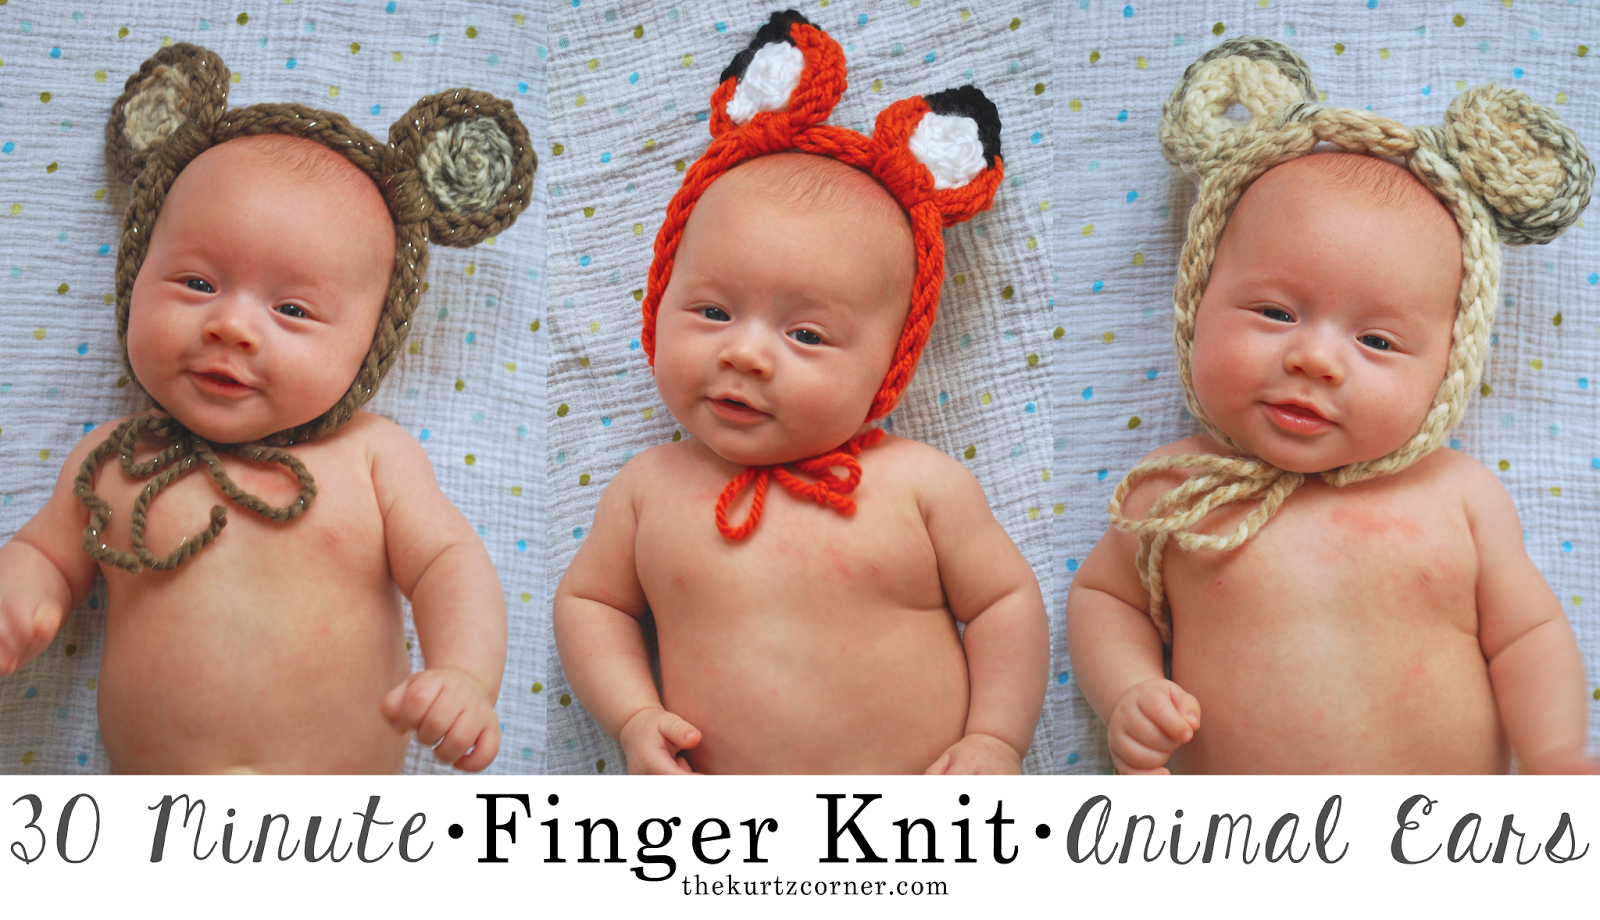 Finger Knitting Projects- Animal Ears